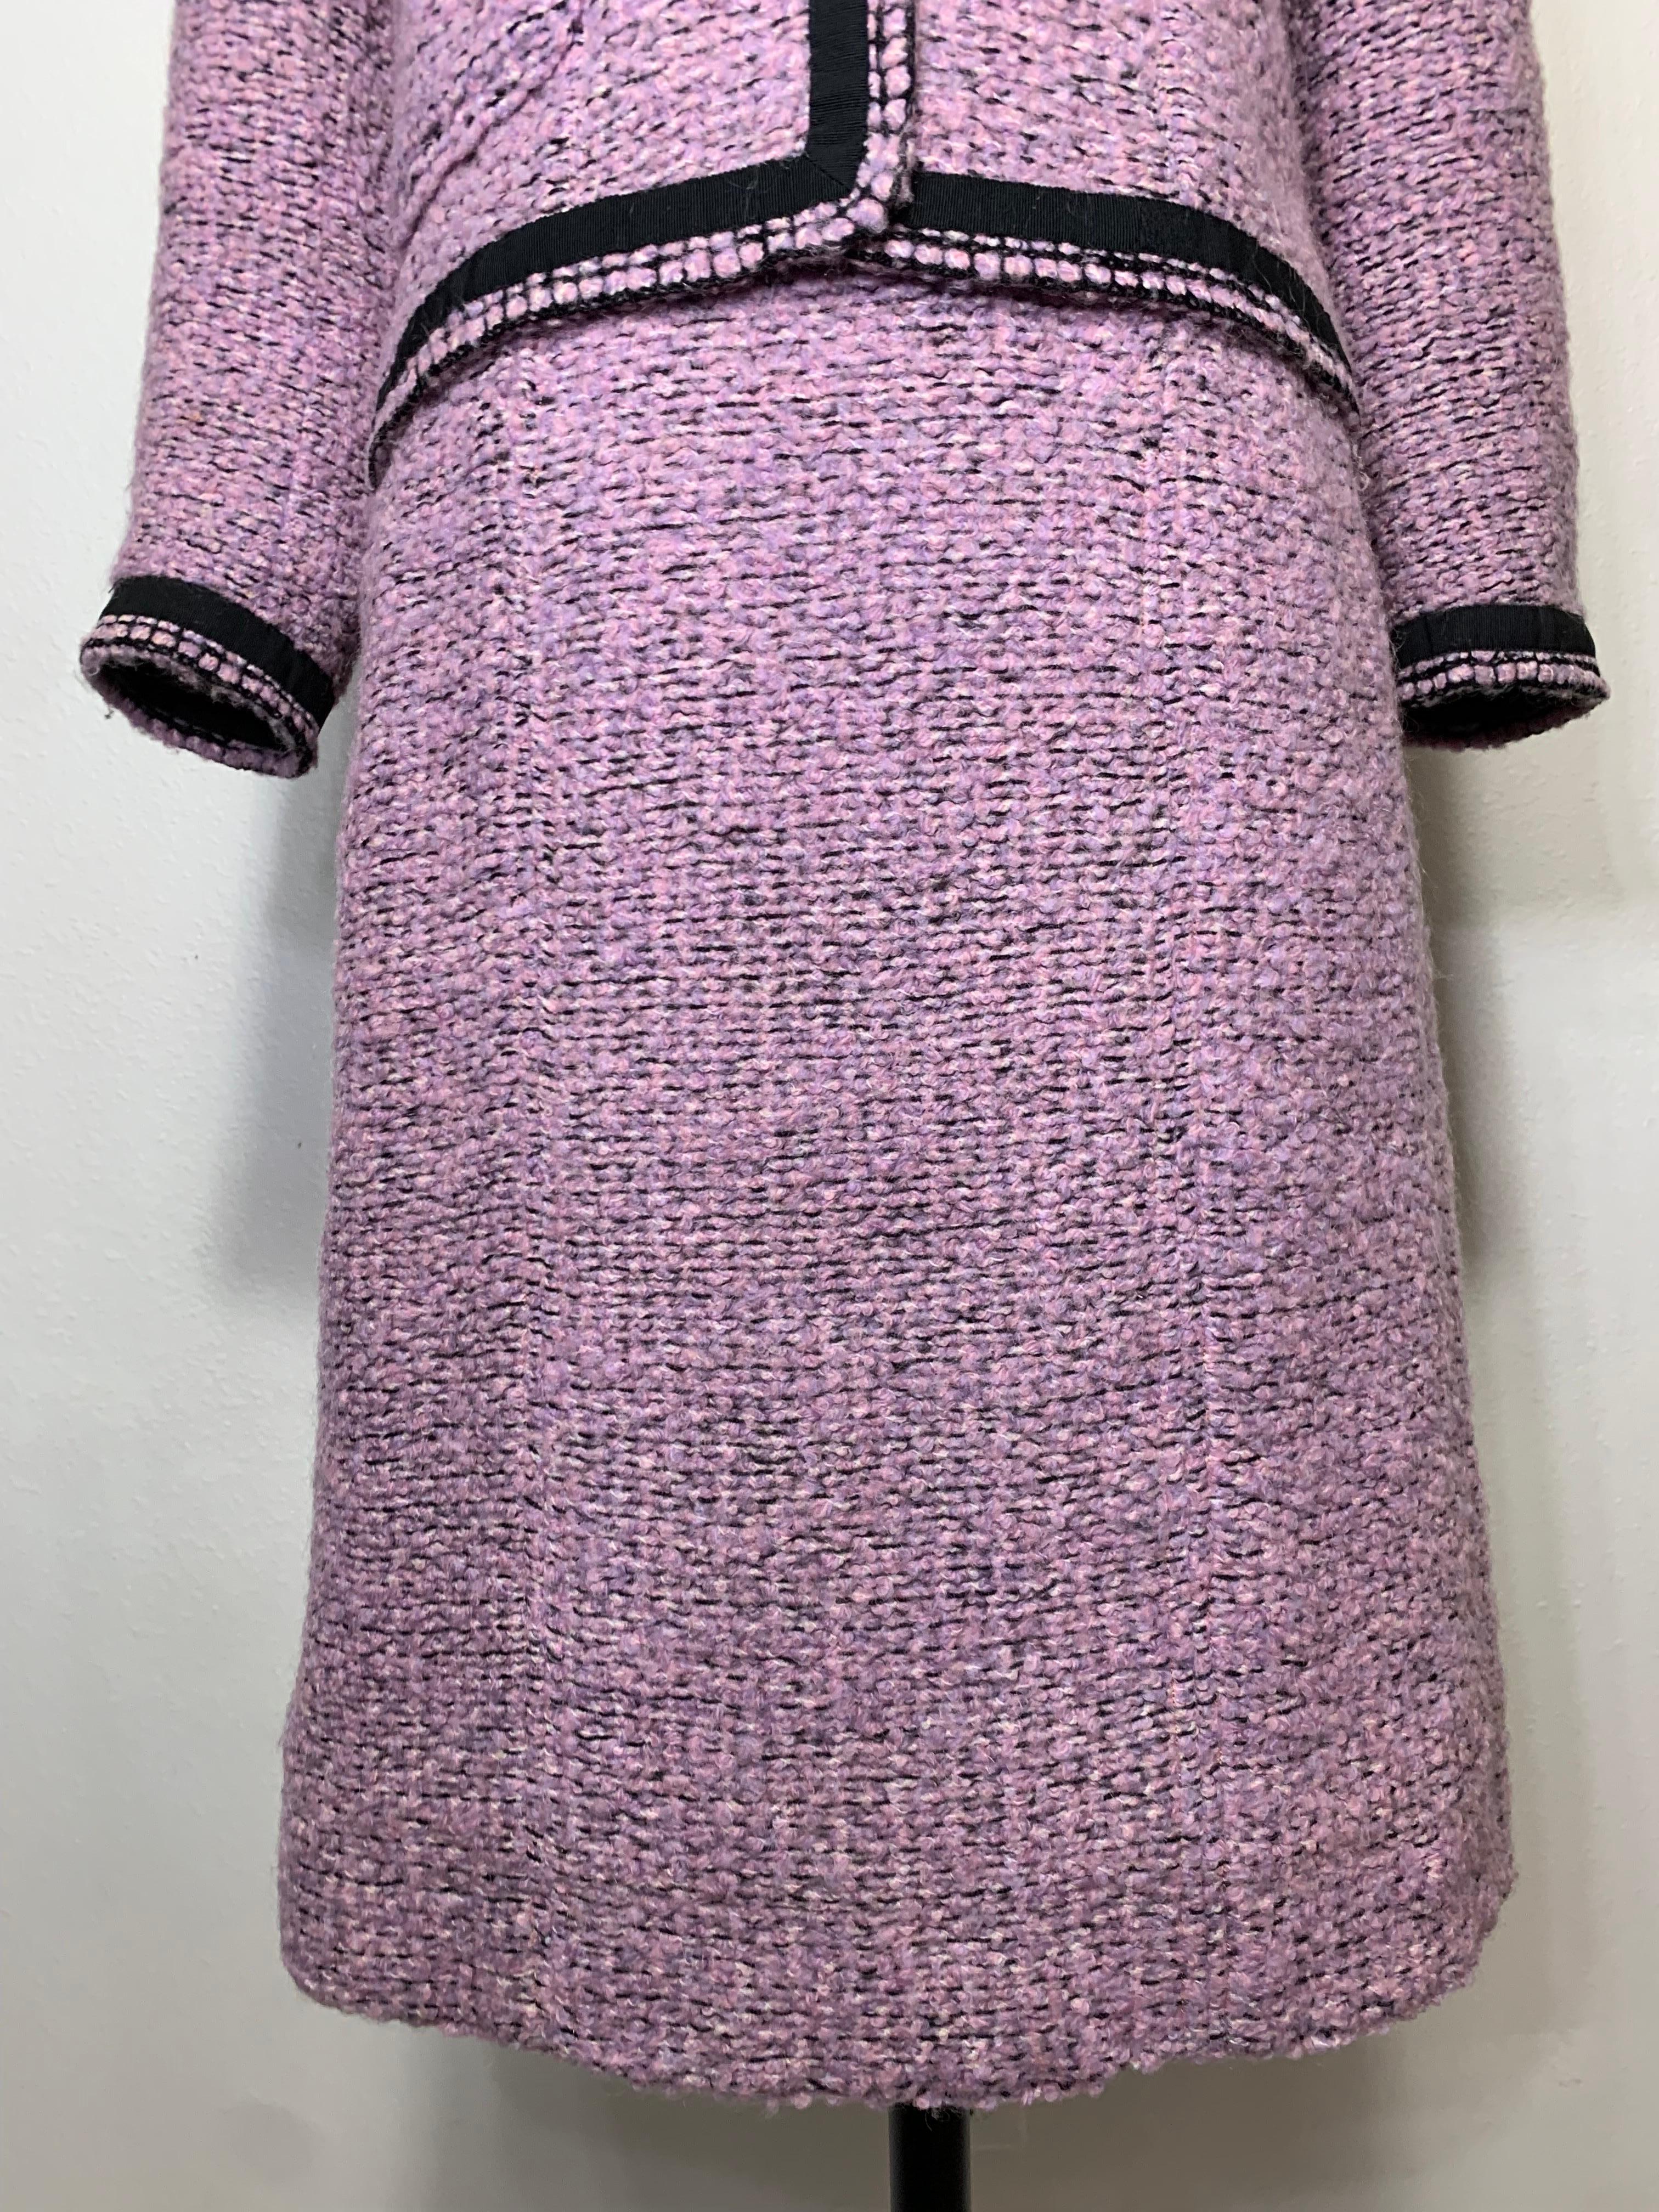 1960 Autumn/Winter Chanel Haute Couture Documented Lavender Tweed Skirt Suit  For Sale 2